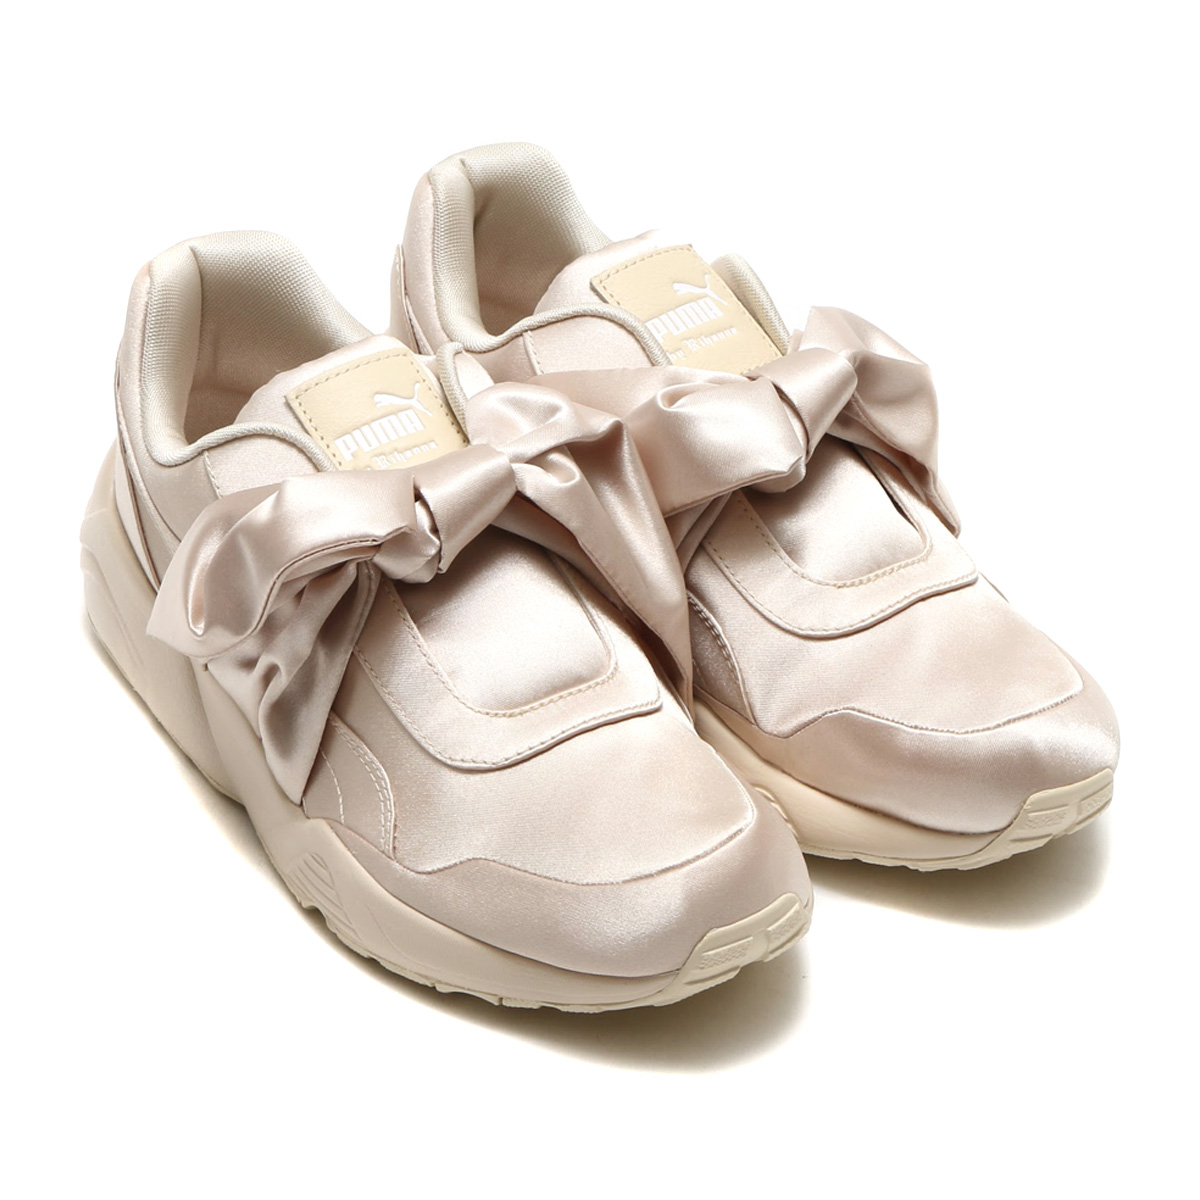 puma sneakers bow, OFF 72%,Buy!